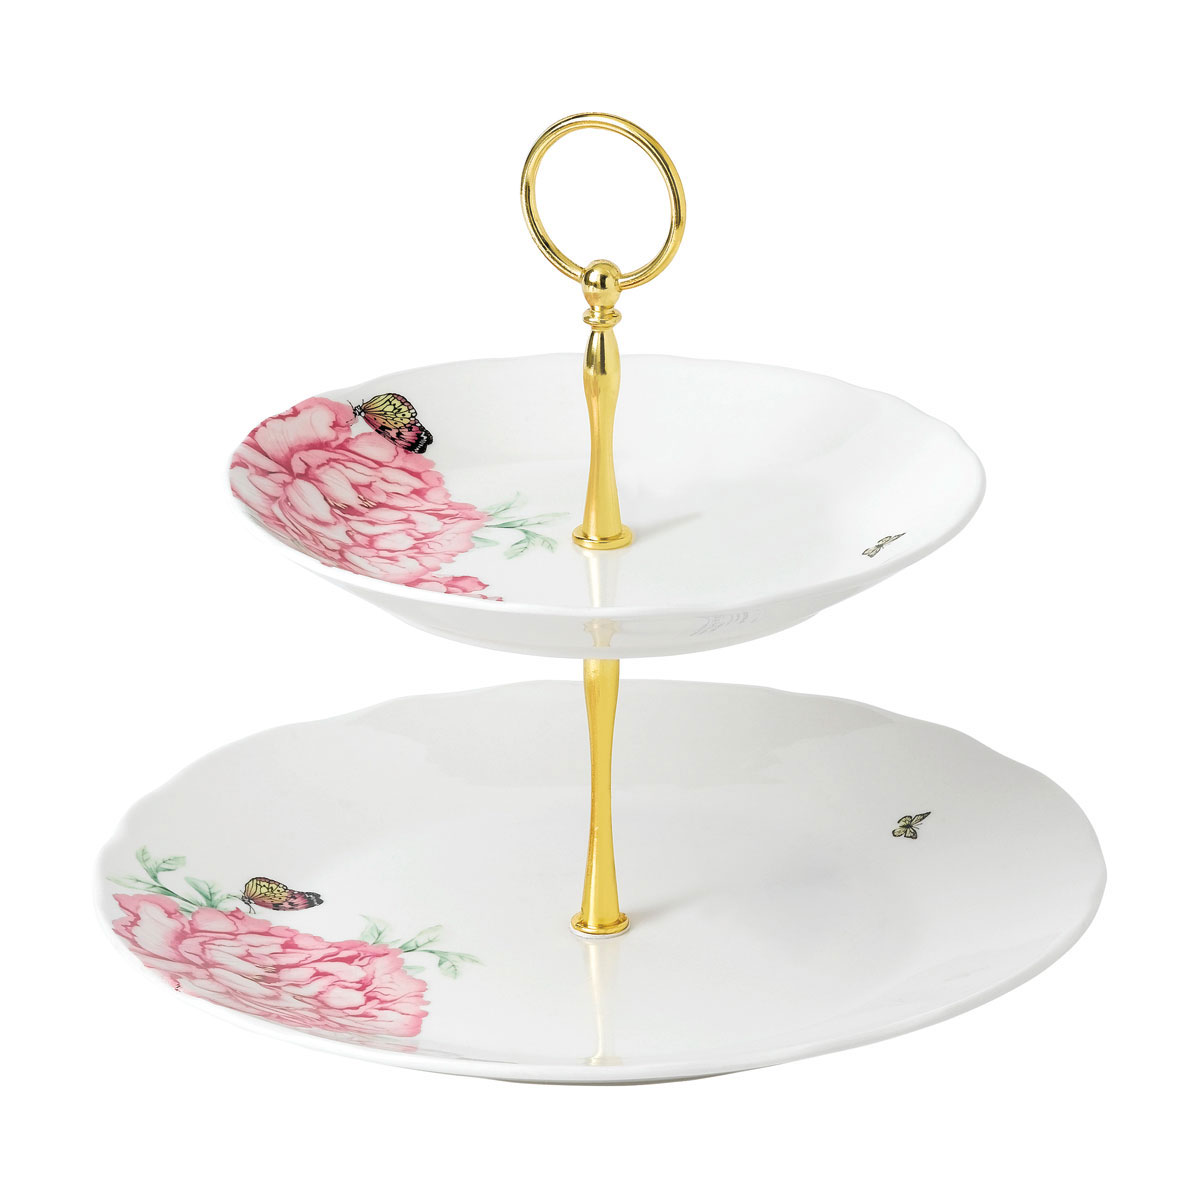 Royal Albert Everyday Friendship Cake Stand Two-Tier White